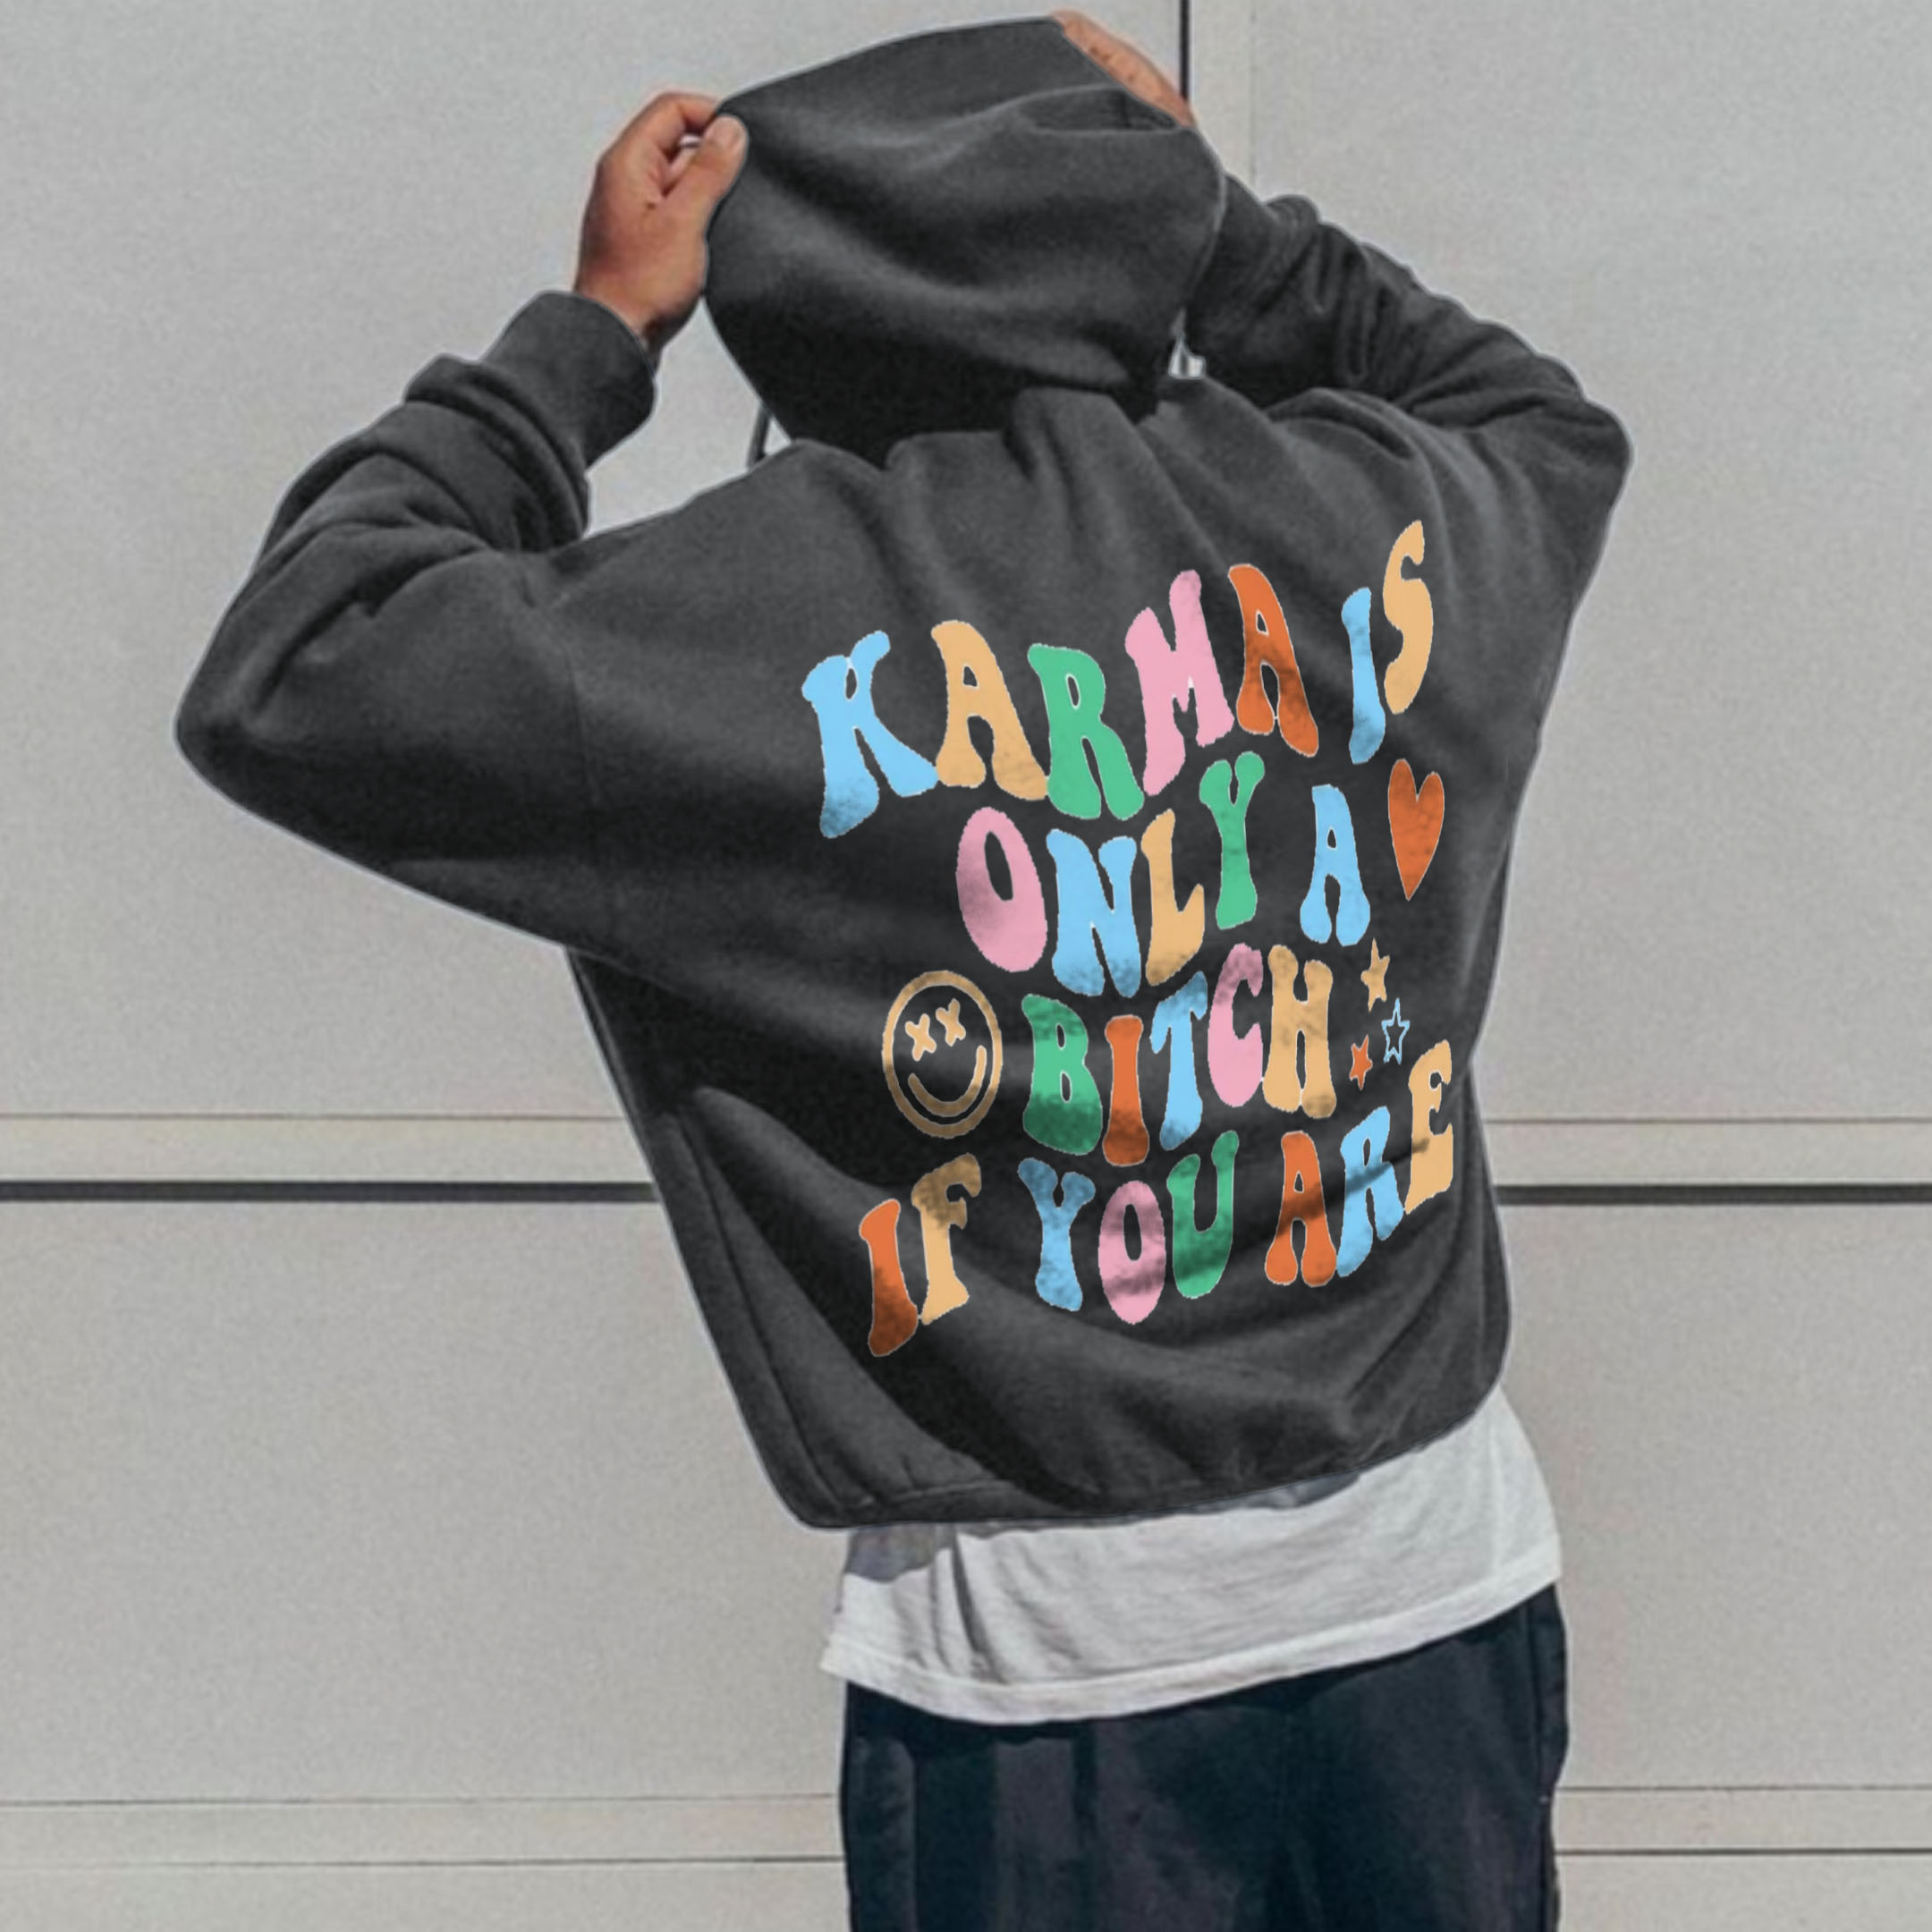 Karma Is Only A Bitch If You Are, Men's Hoodie. / [blueesa] /